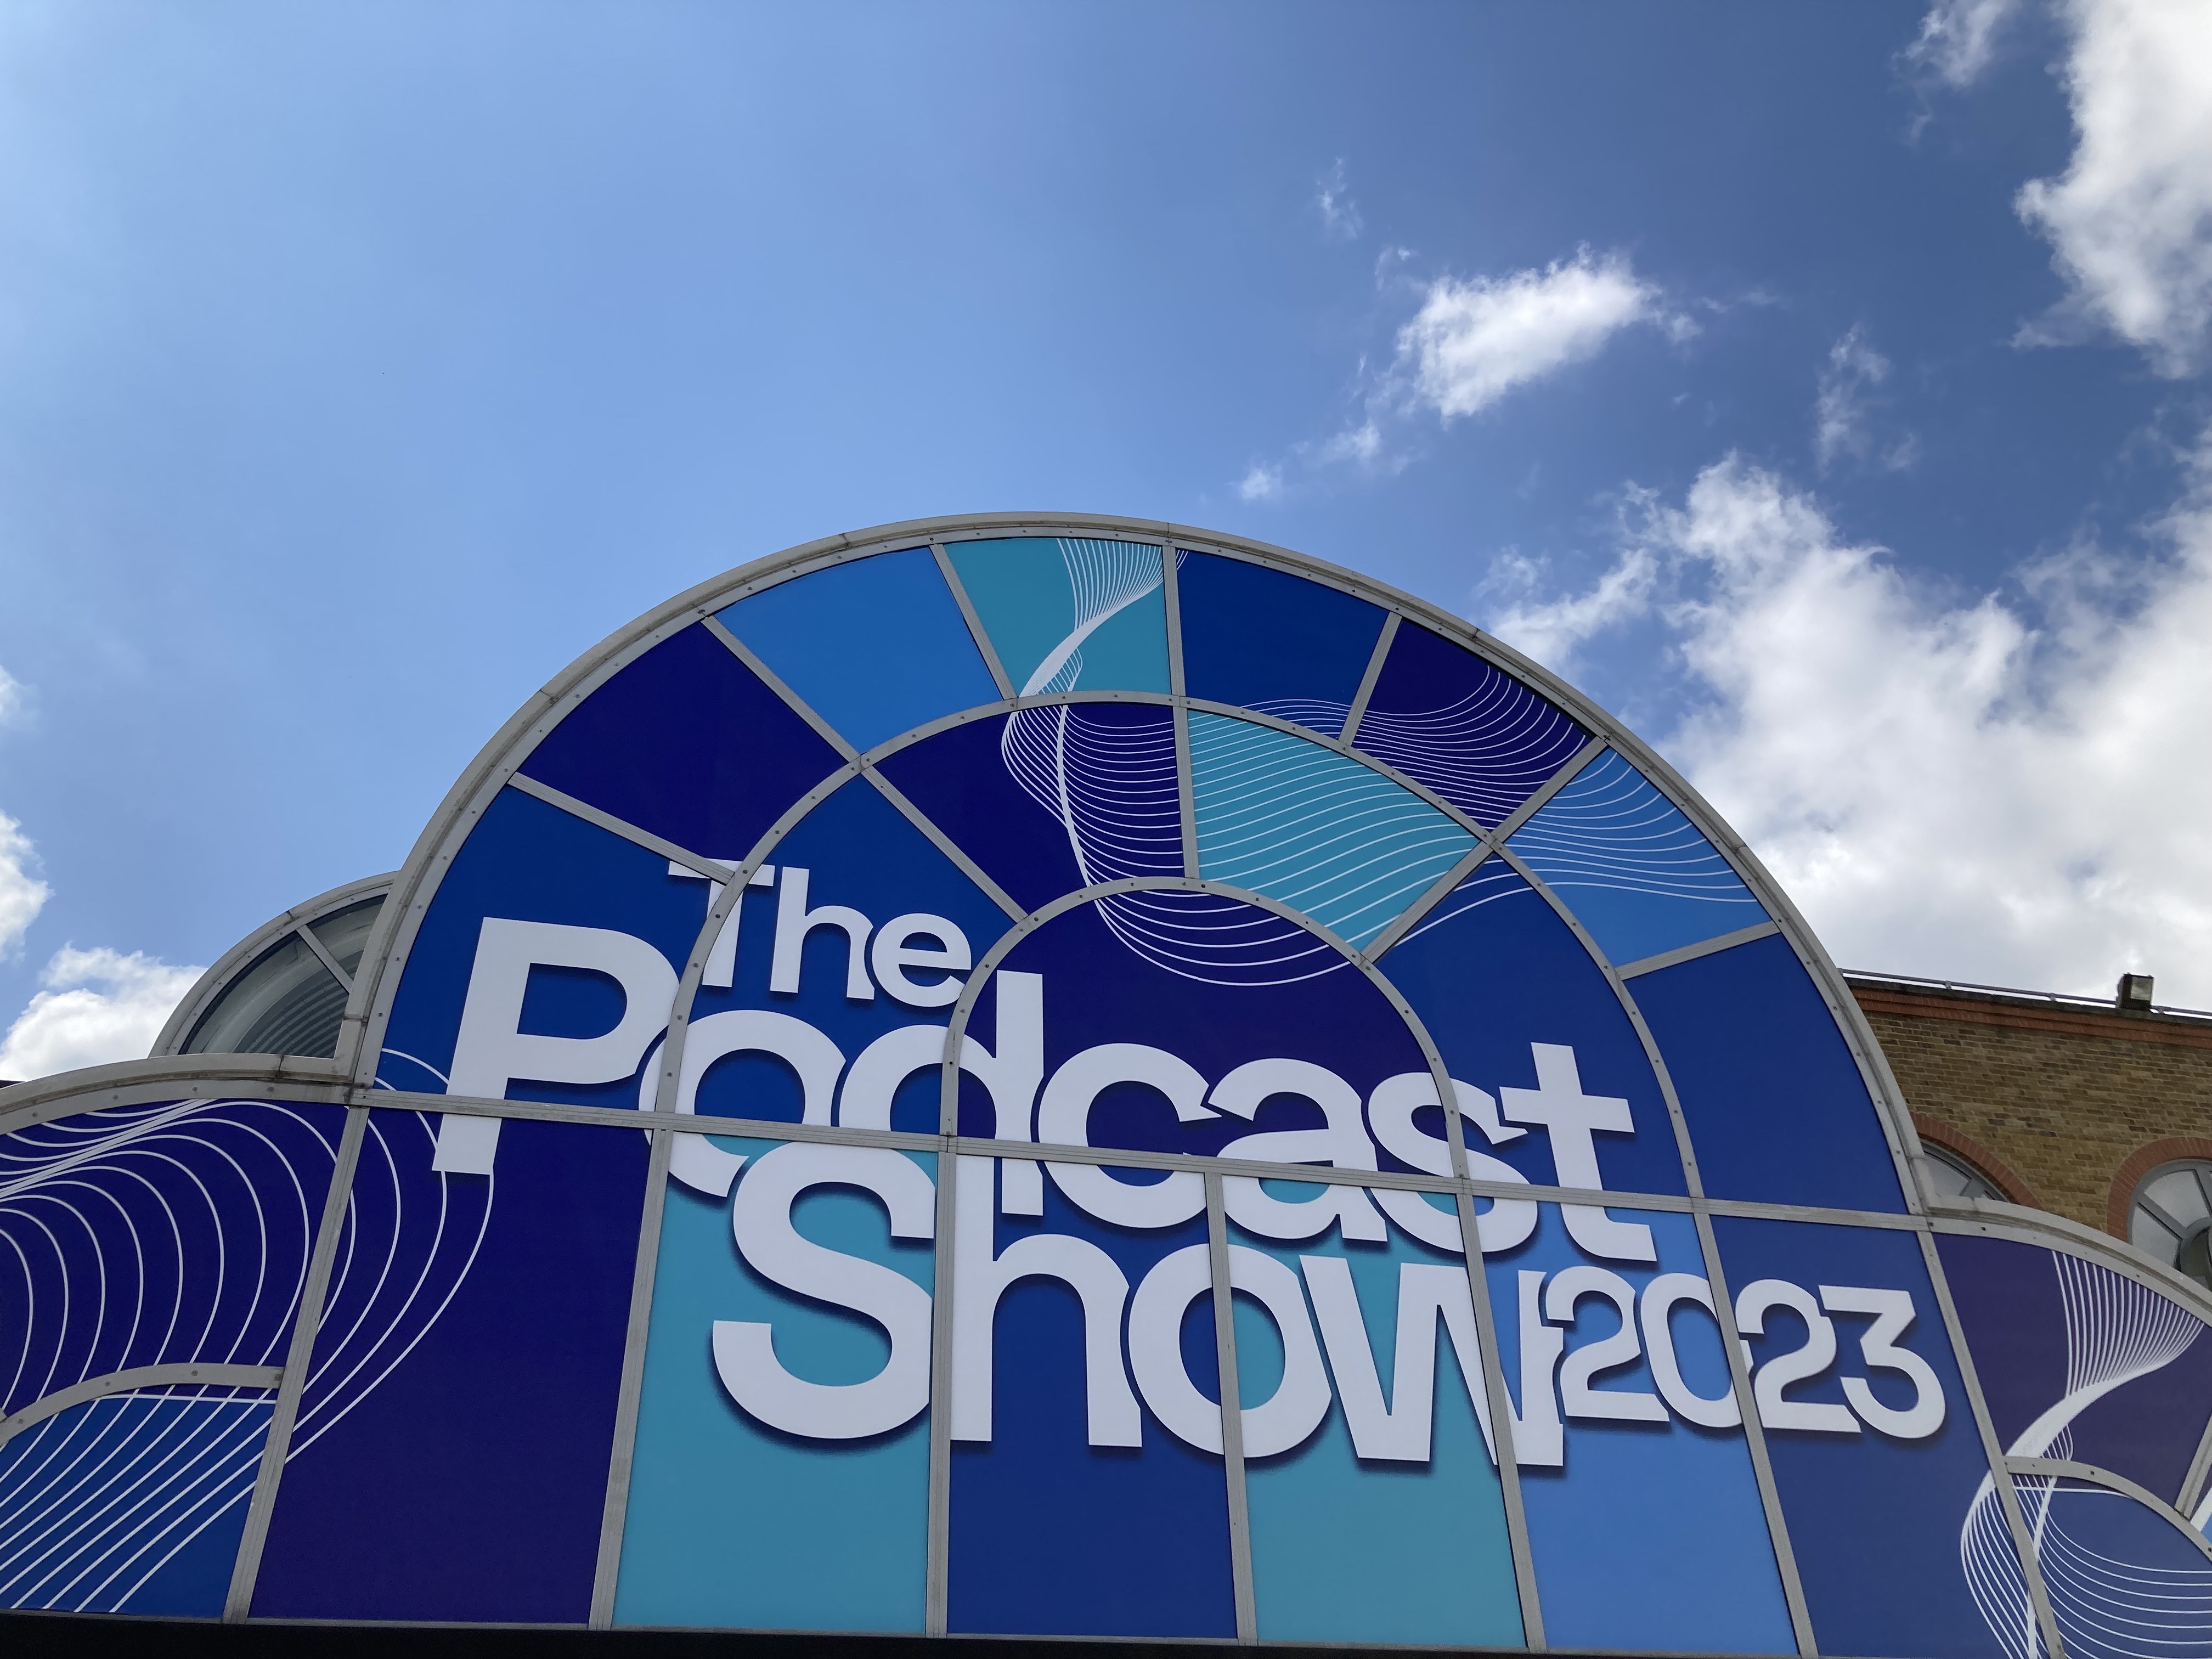 20230524_The Podcast Show_Hear from the Hirers_04.jpg